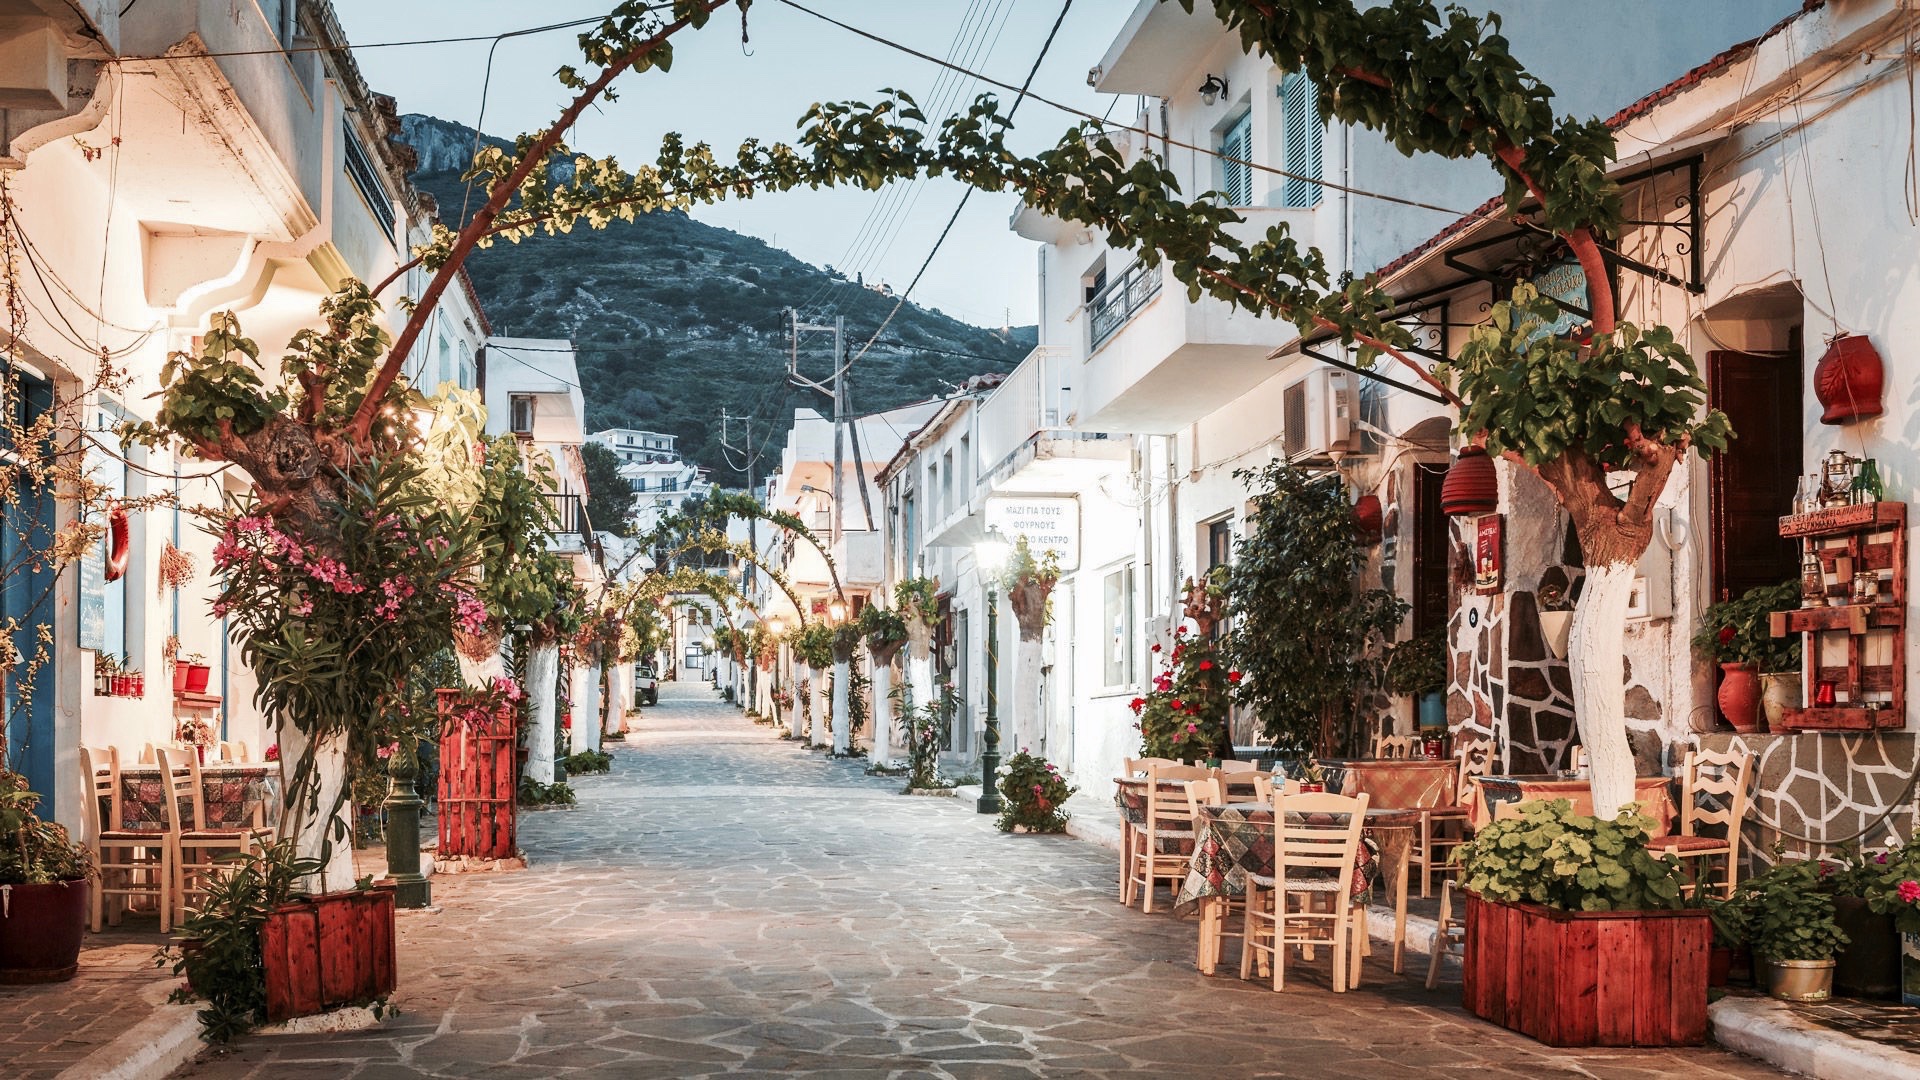 Top 10 Things to do in Ikaria - Insights Greece